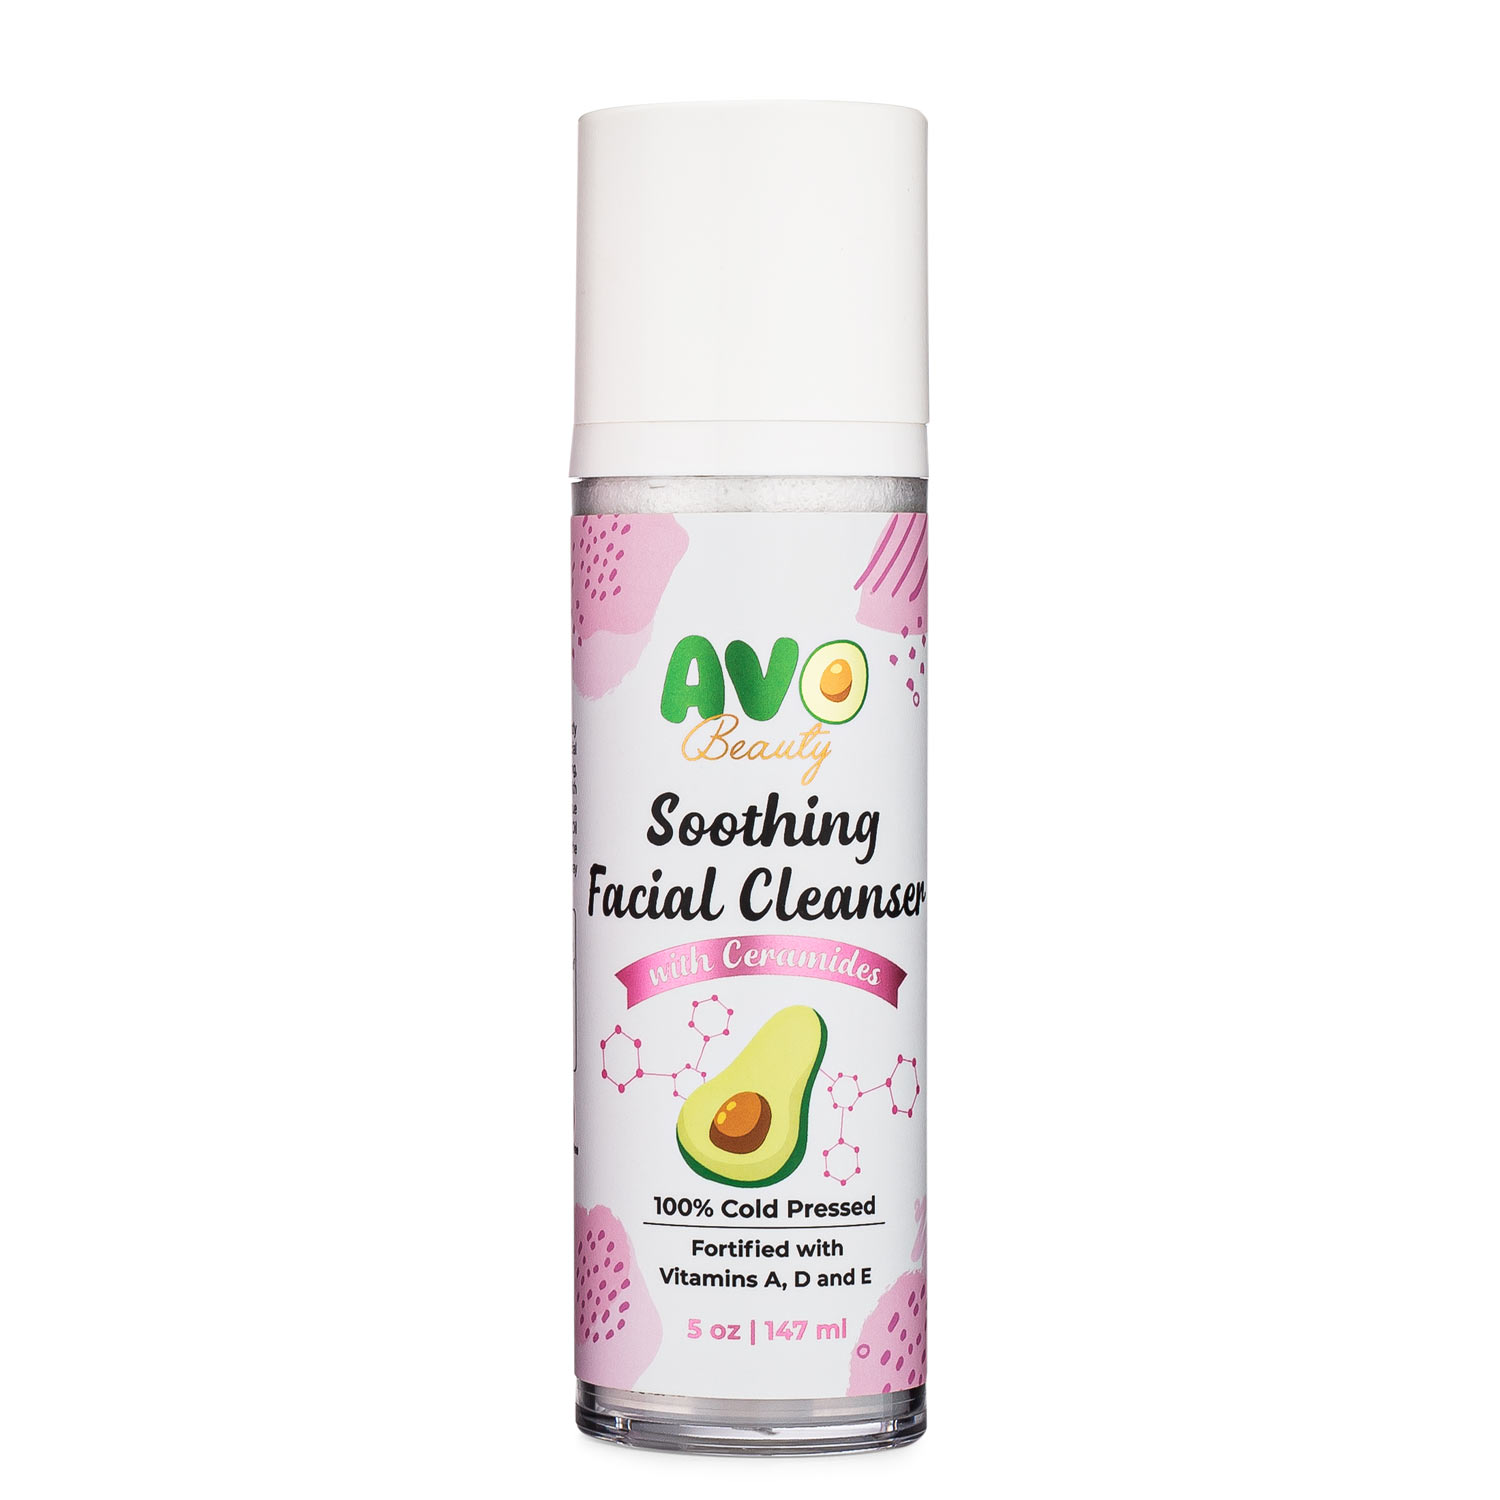 Soothing-Facial-Cleanser-Avo-Beauty